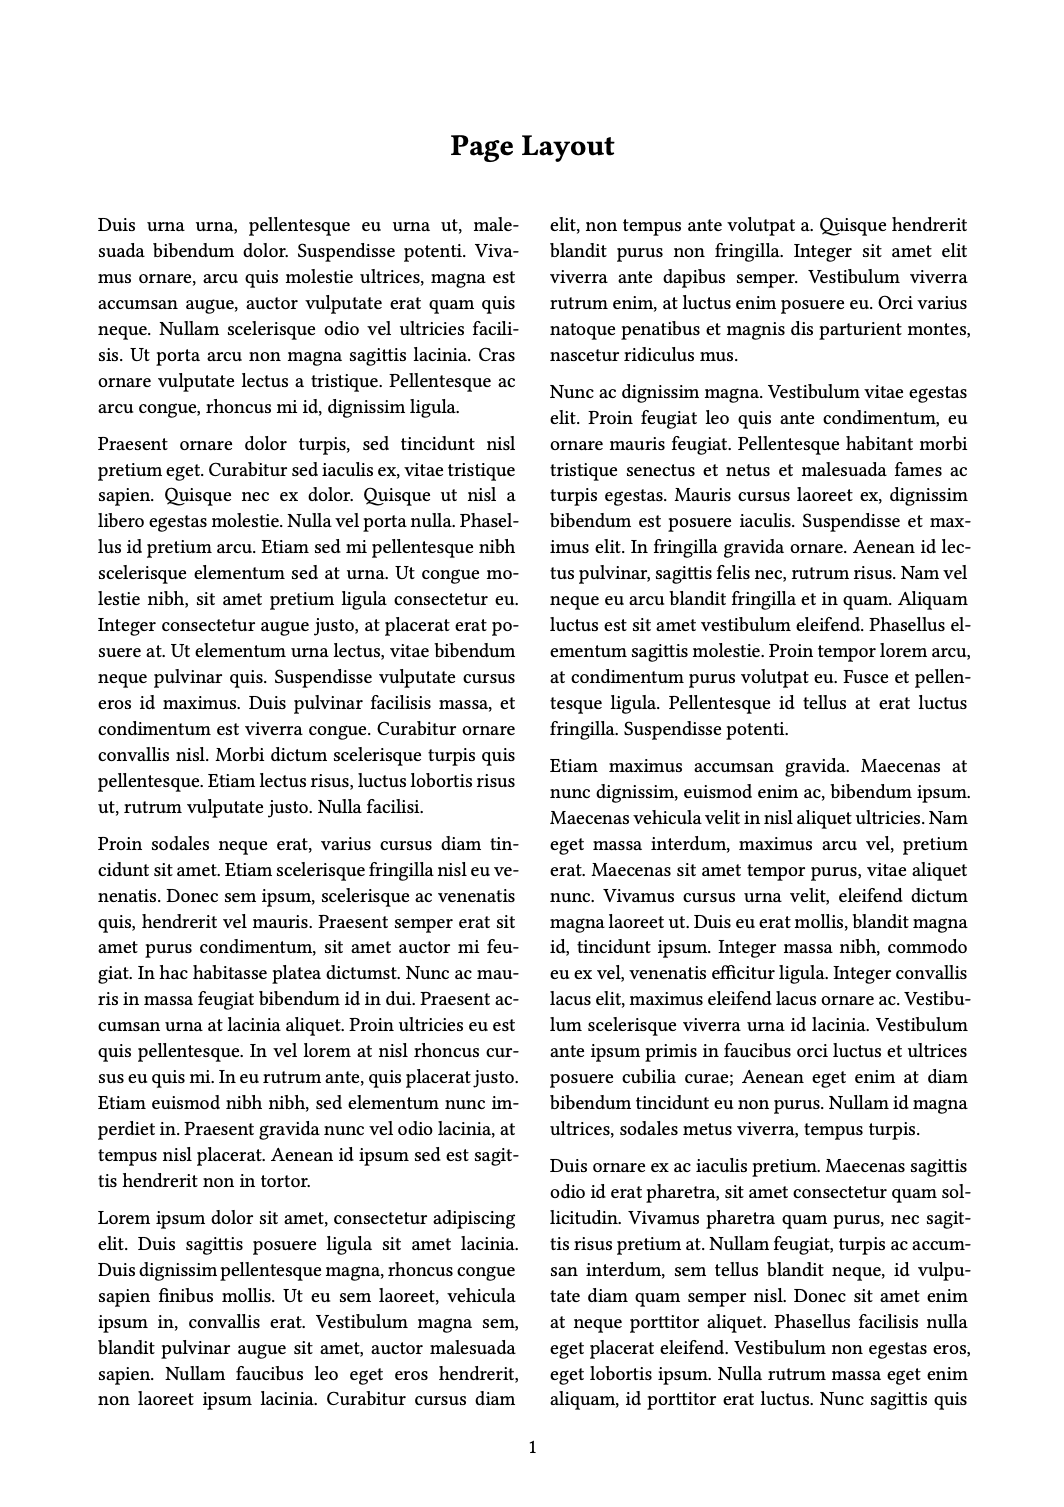 Screenshot of one page of PDF document. The document shows a two columns of text. Compared to the previous screenshot, the page is narrower and longer, and the margins are smaller.